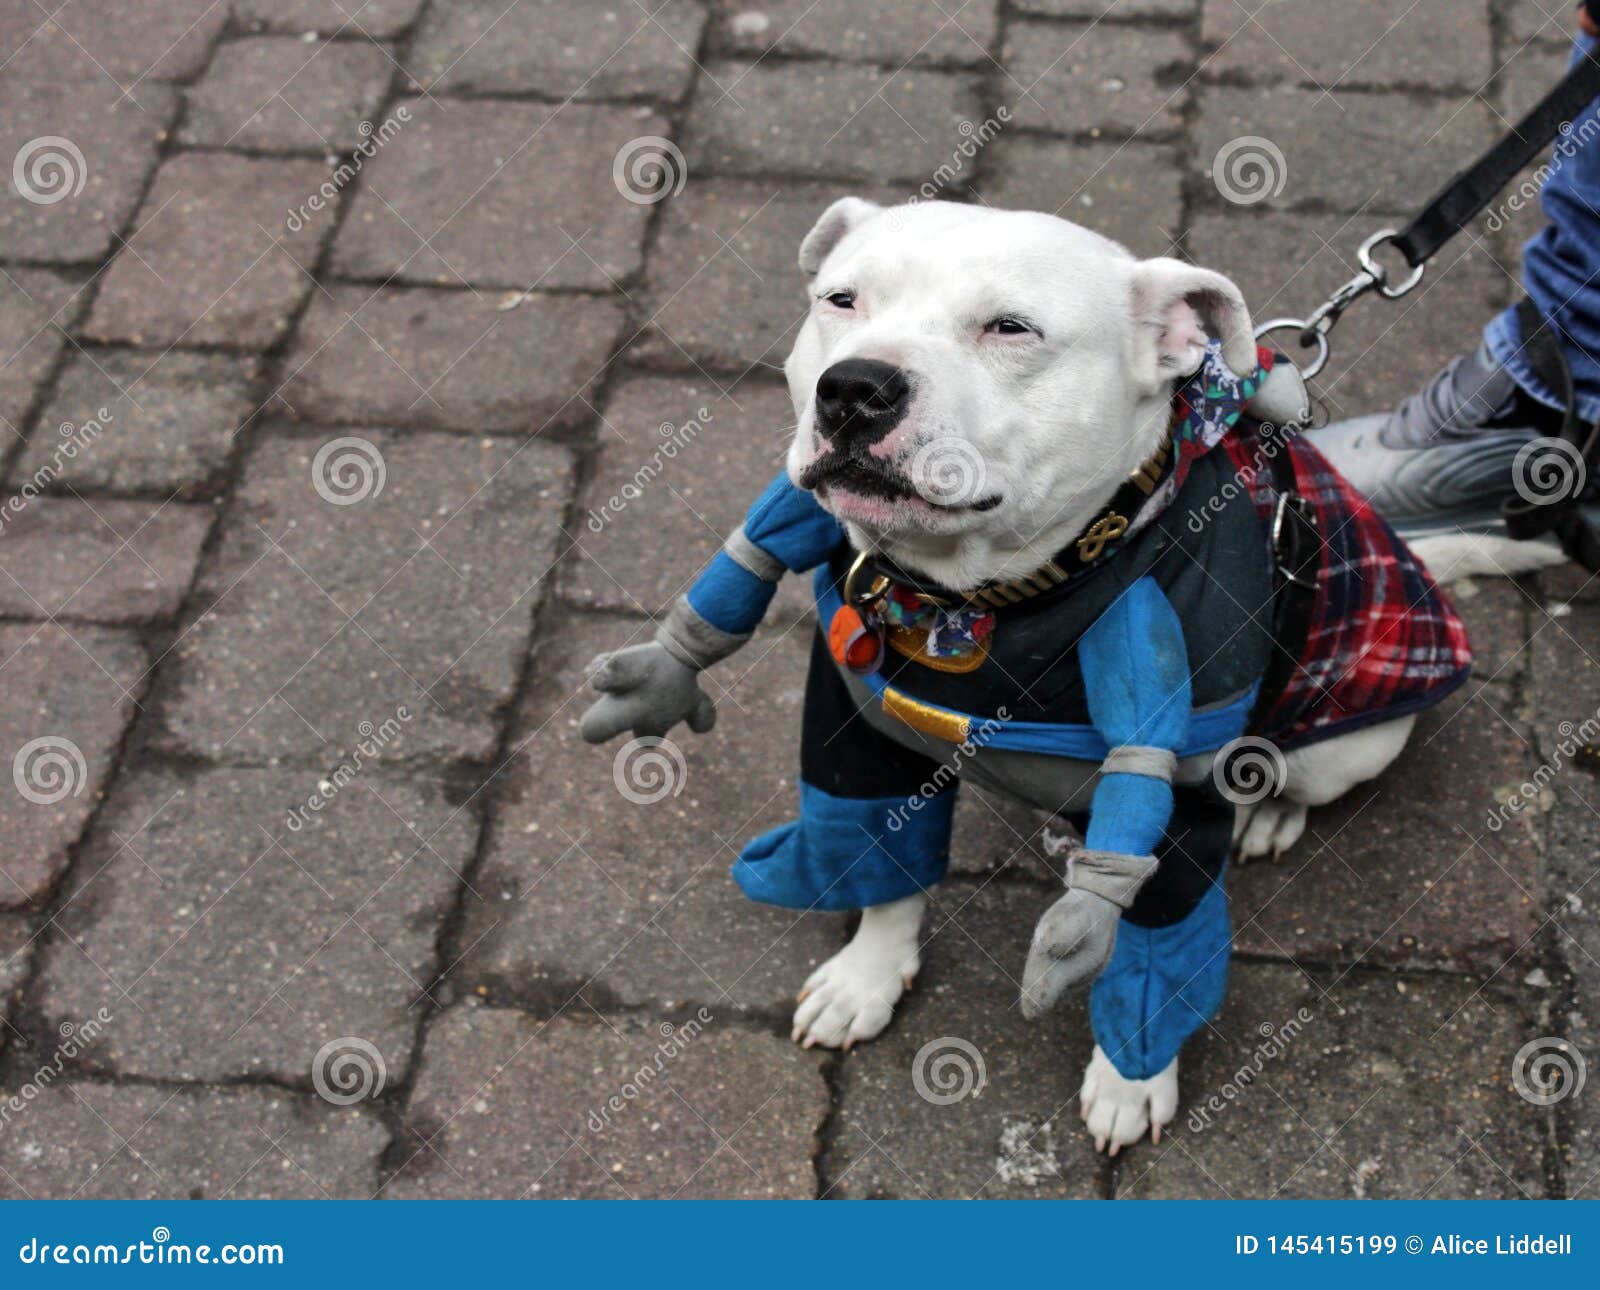 Staffordshire Pit Bull Terrier Dressed As A Superhero Stock Image